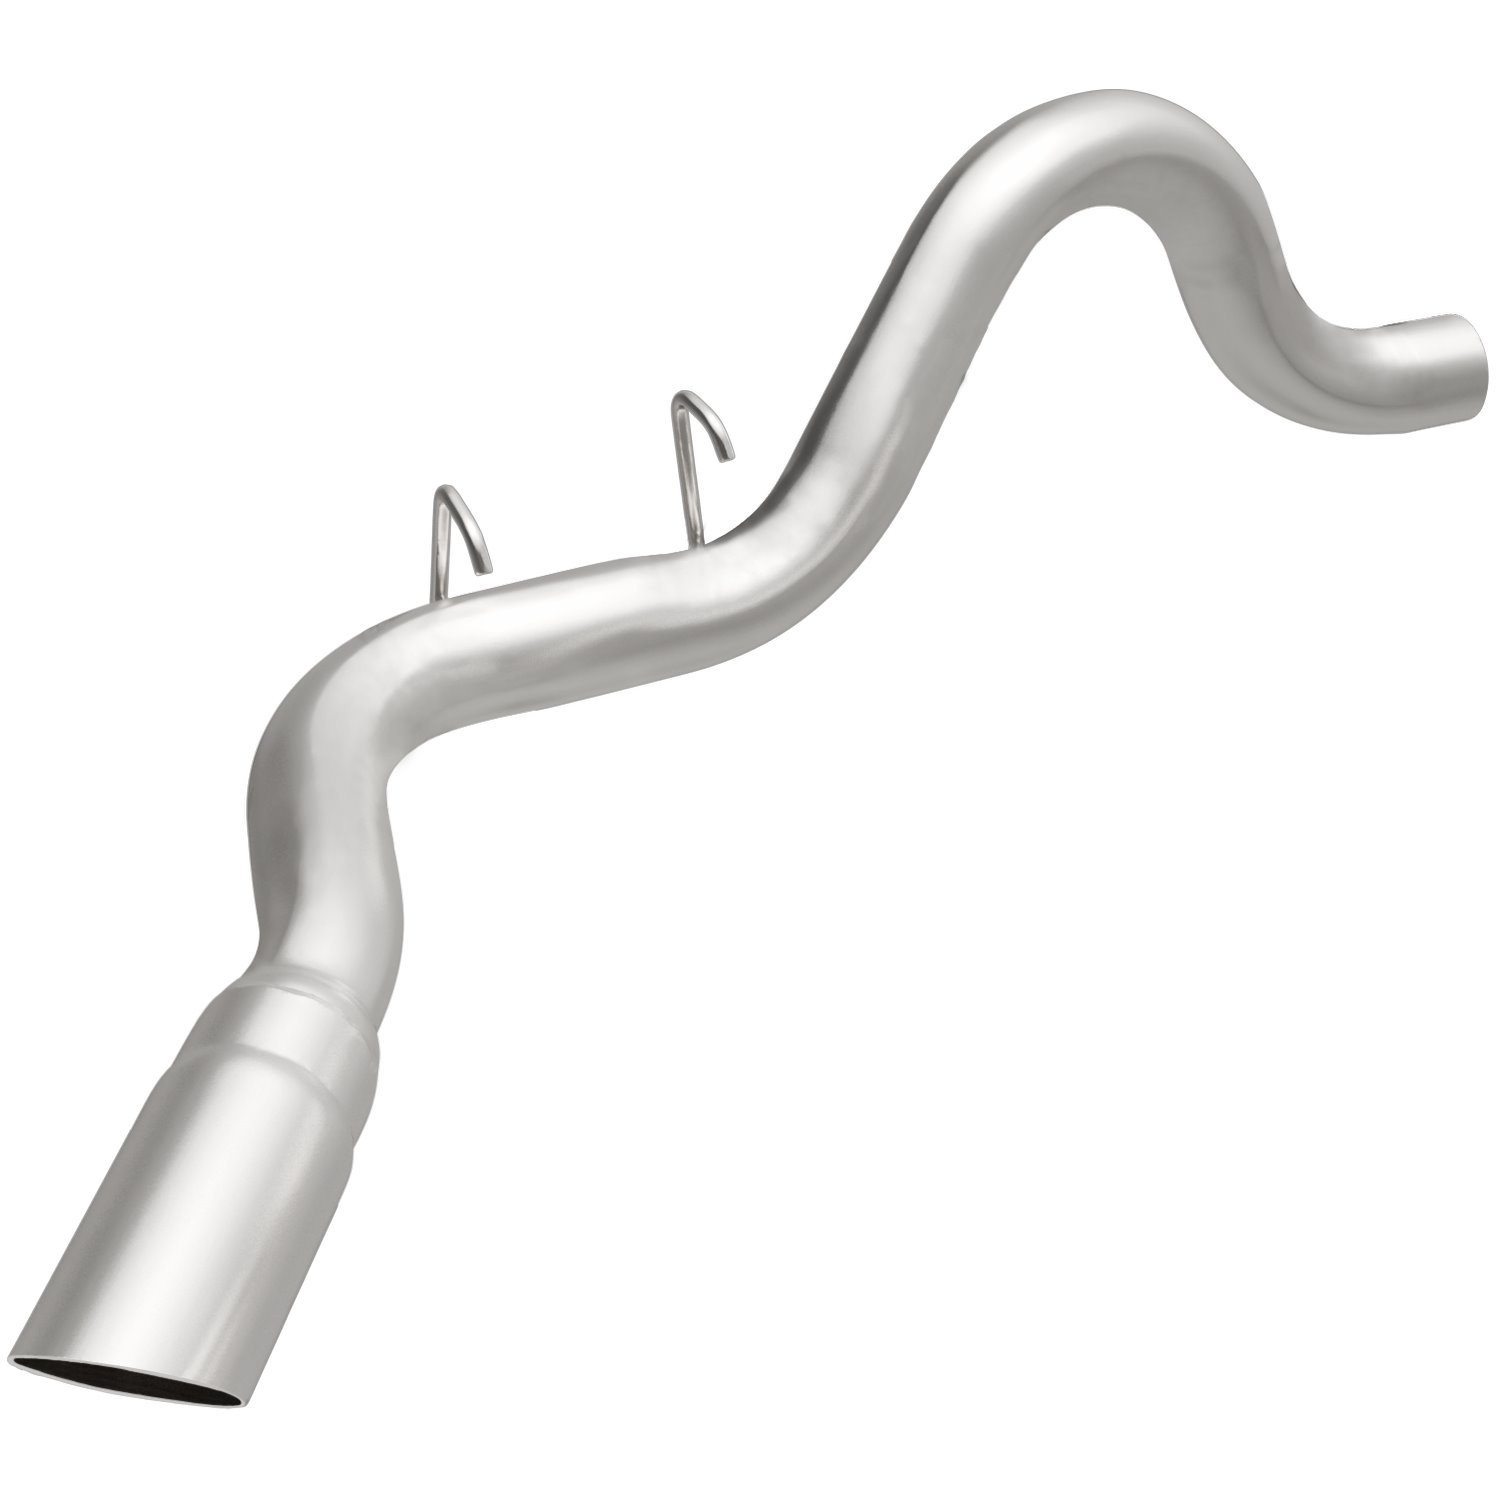 Direct-Fit Exhaust Tail Pipe, 1998-2002 Dodge Ram 2500/3500 5.9L